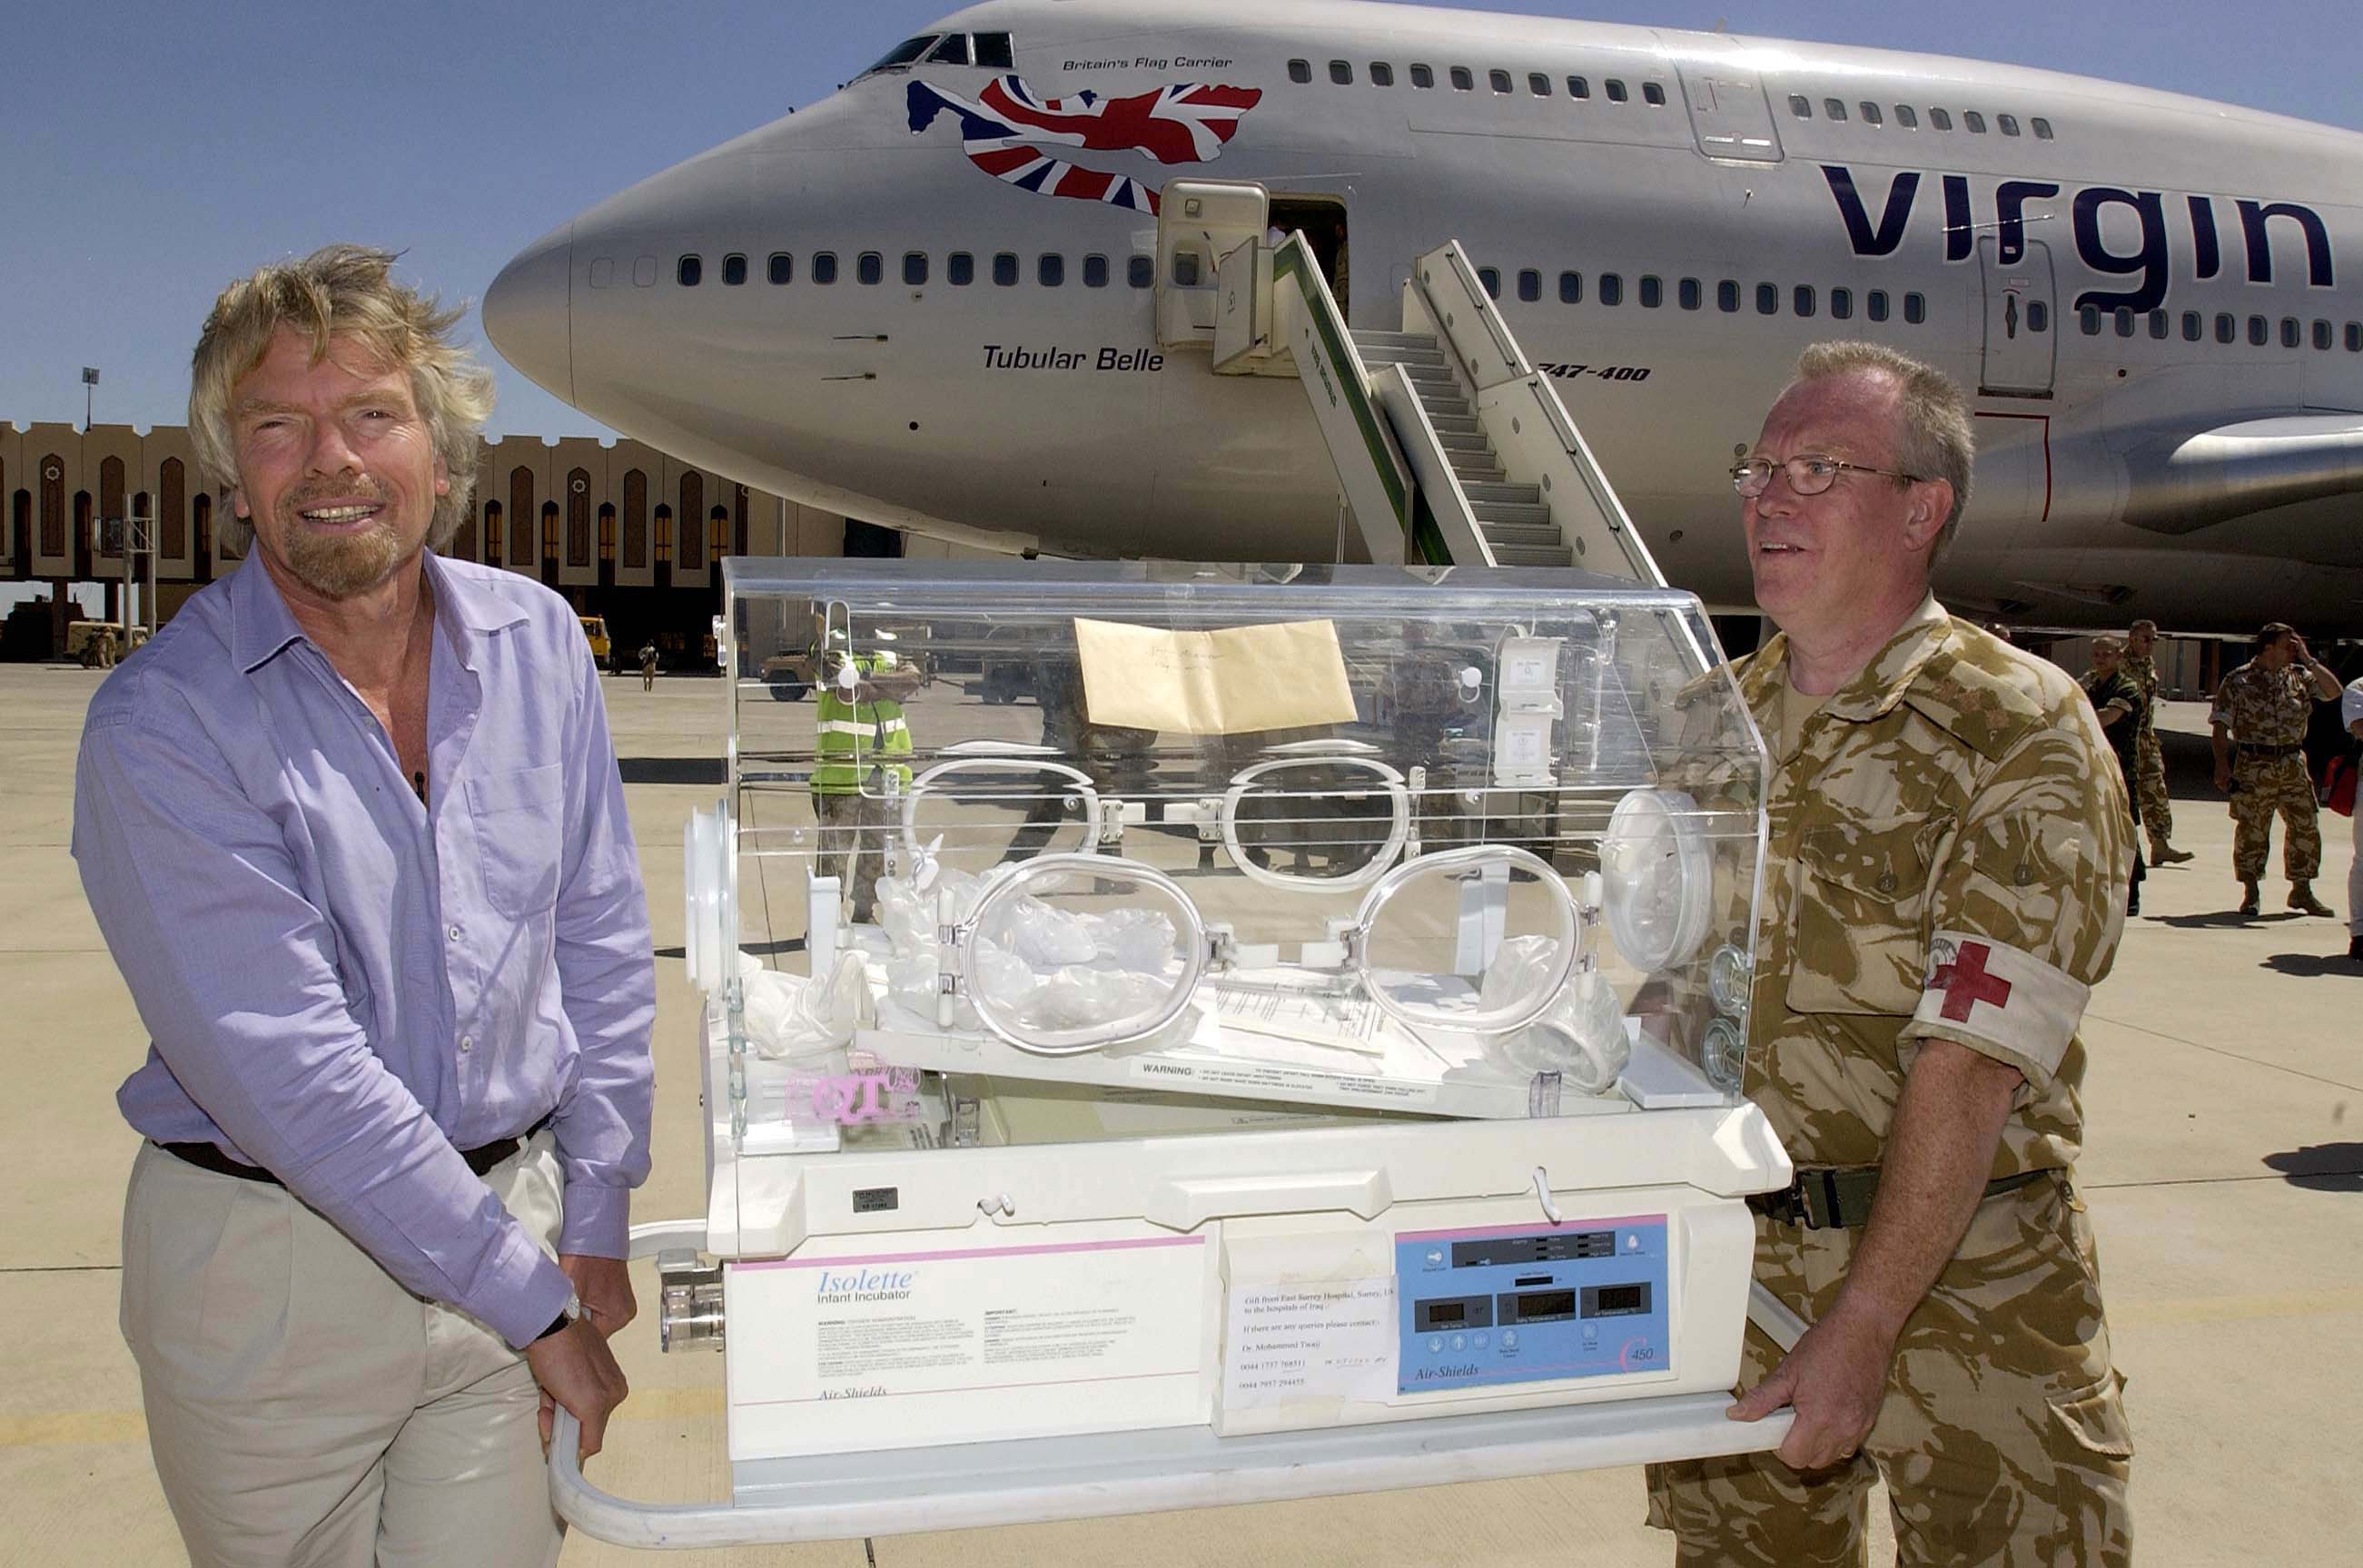 Richard Branson on the tarmac after his aid flight to Iraq with Virgin Atlantic